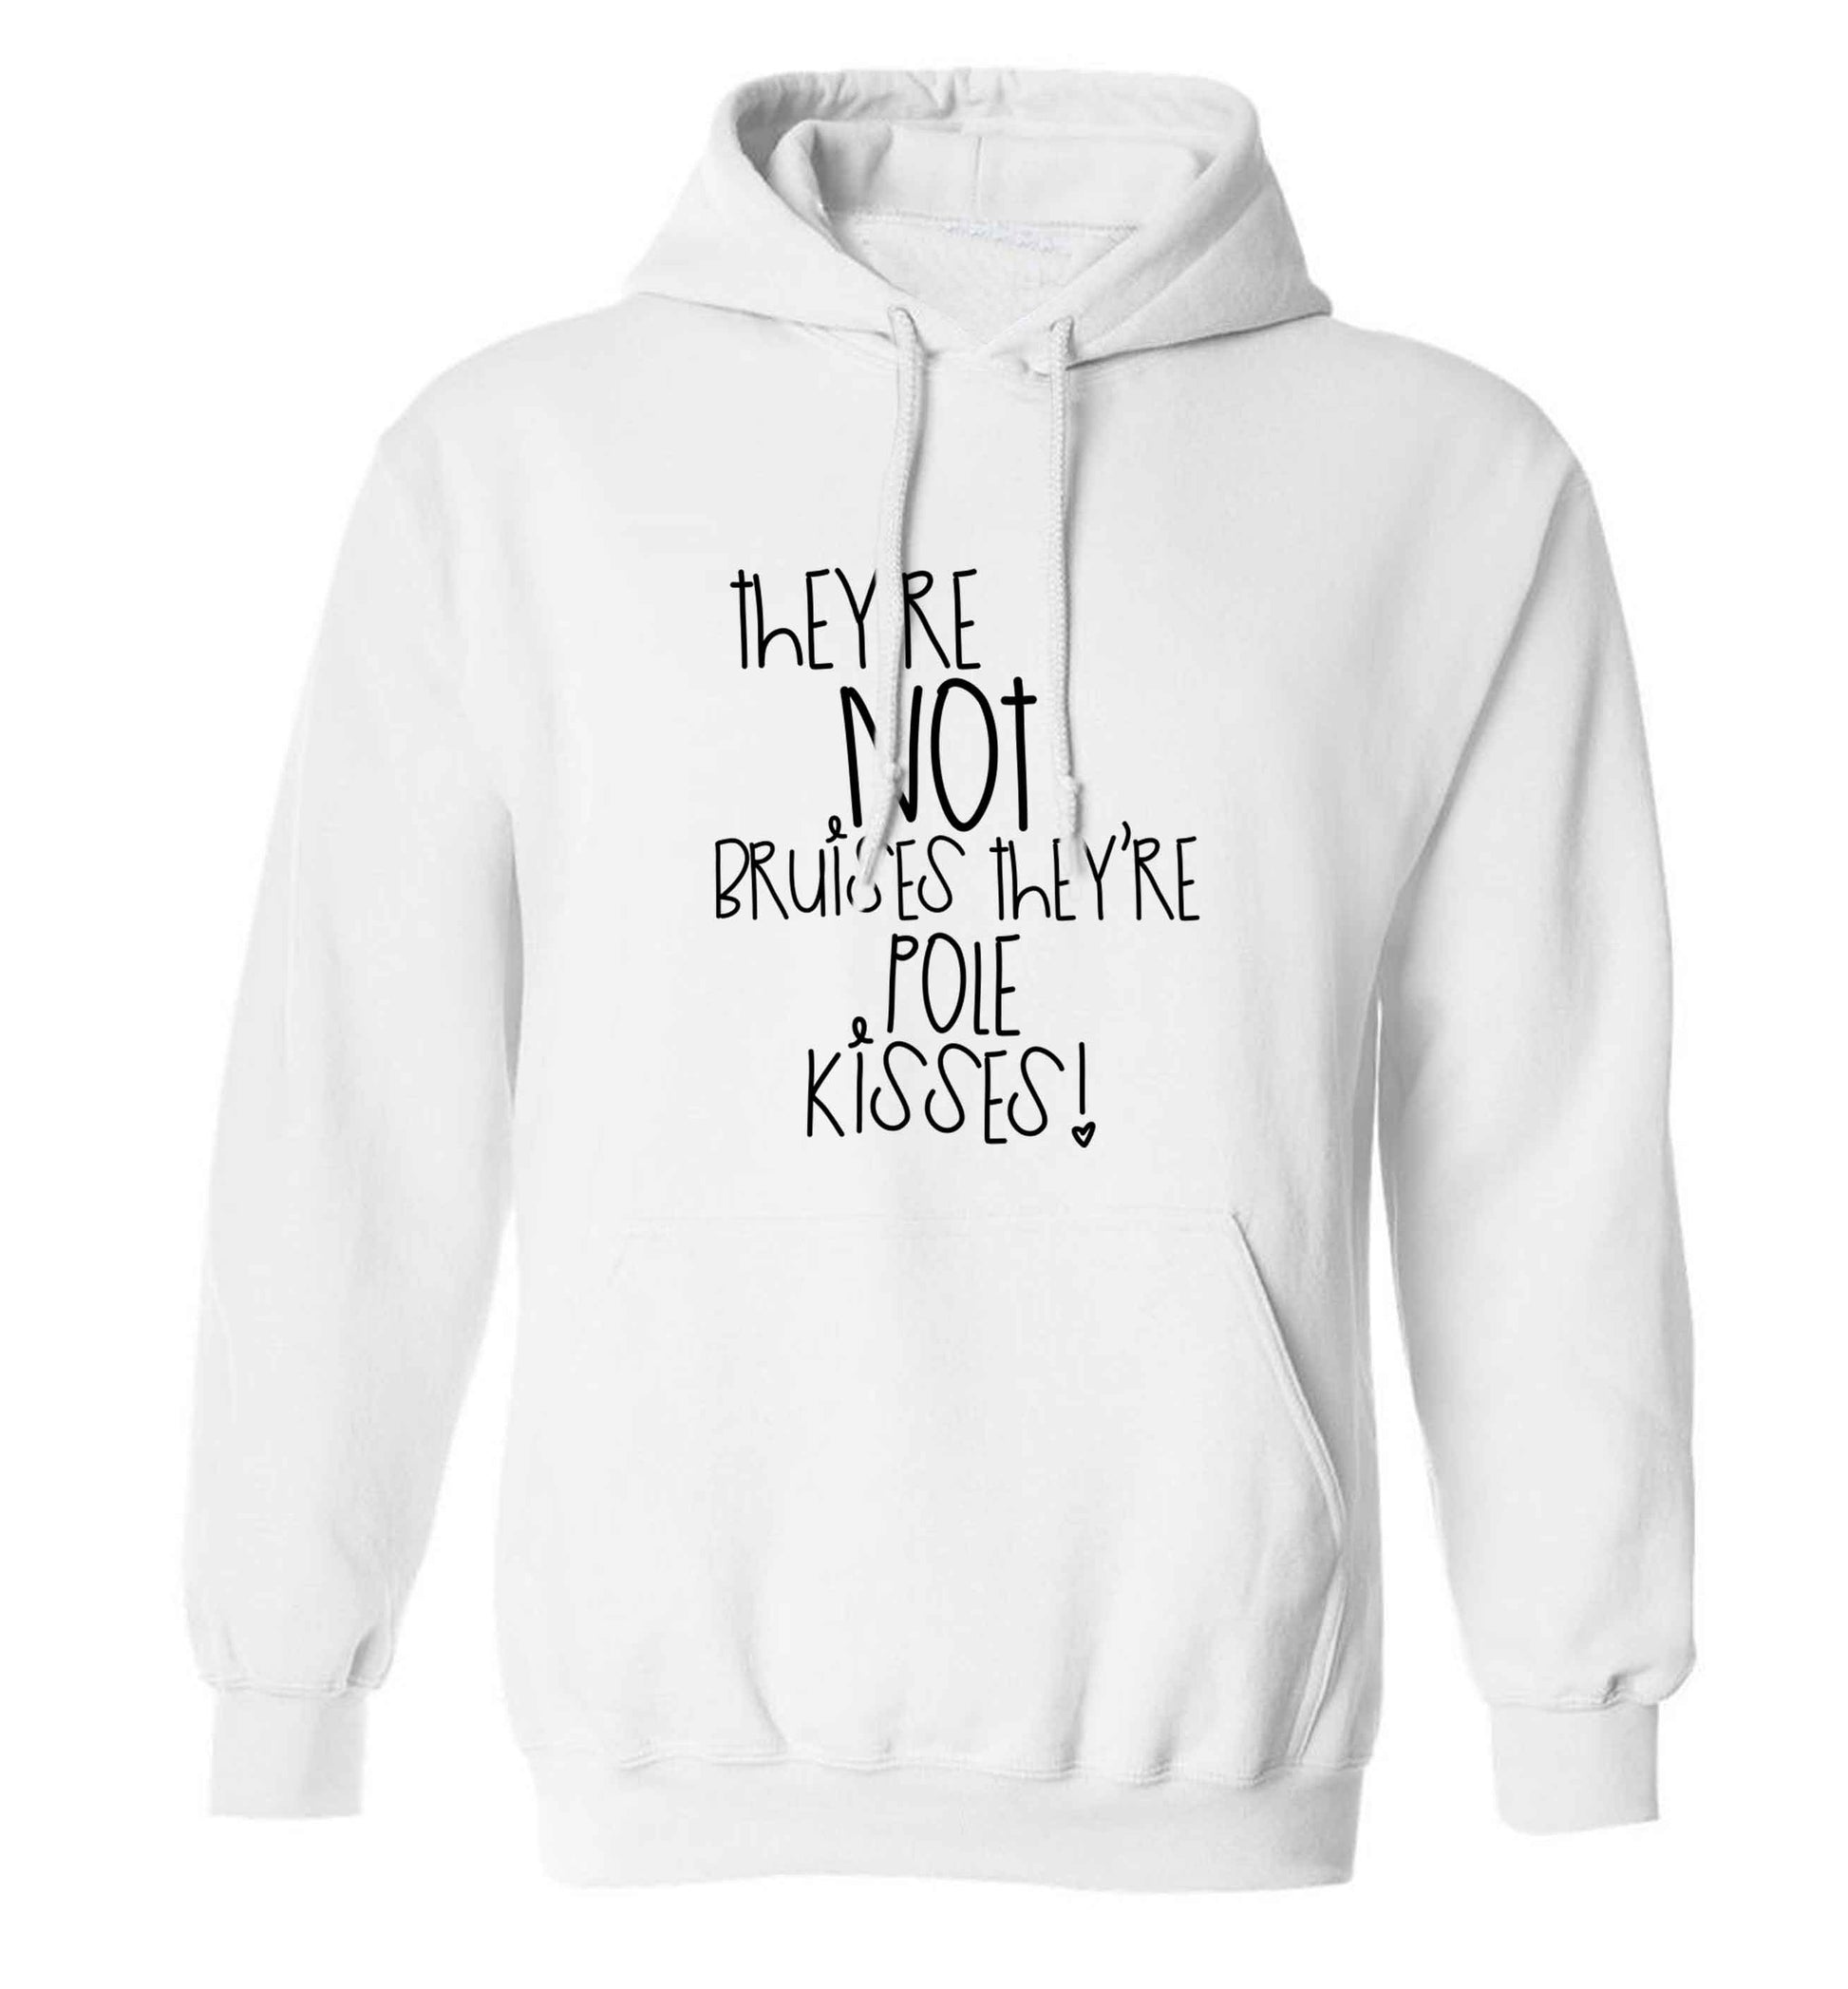 They're not bruises they're pole kisses adults unisex white hoodie 2XL